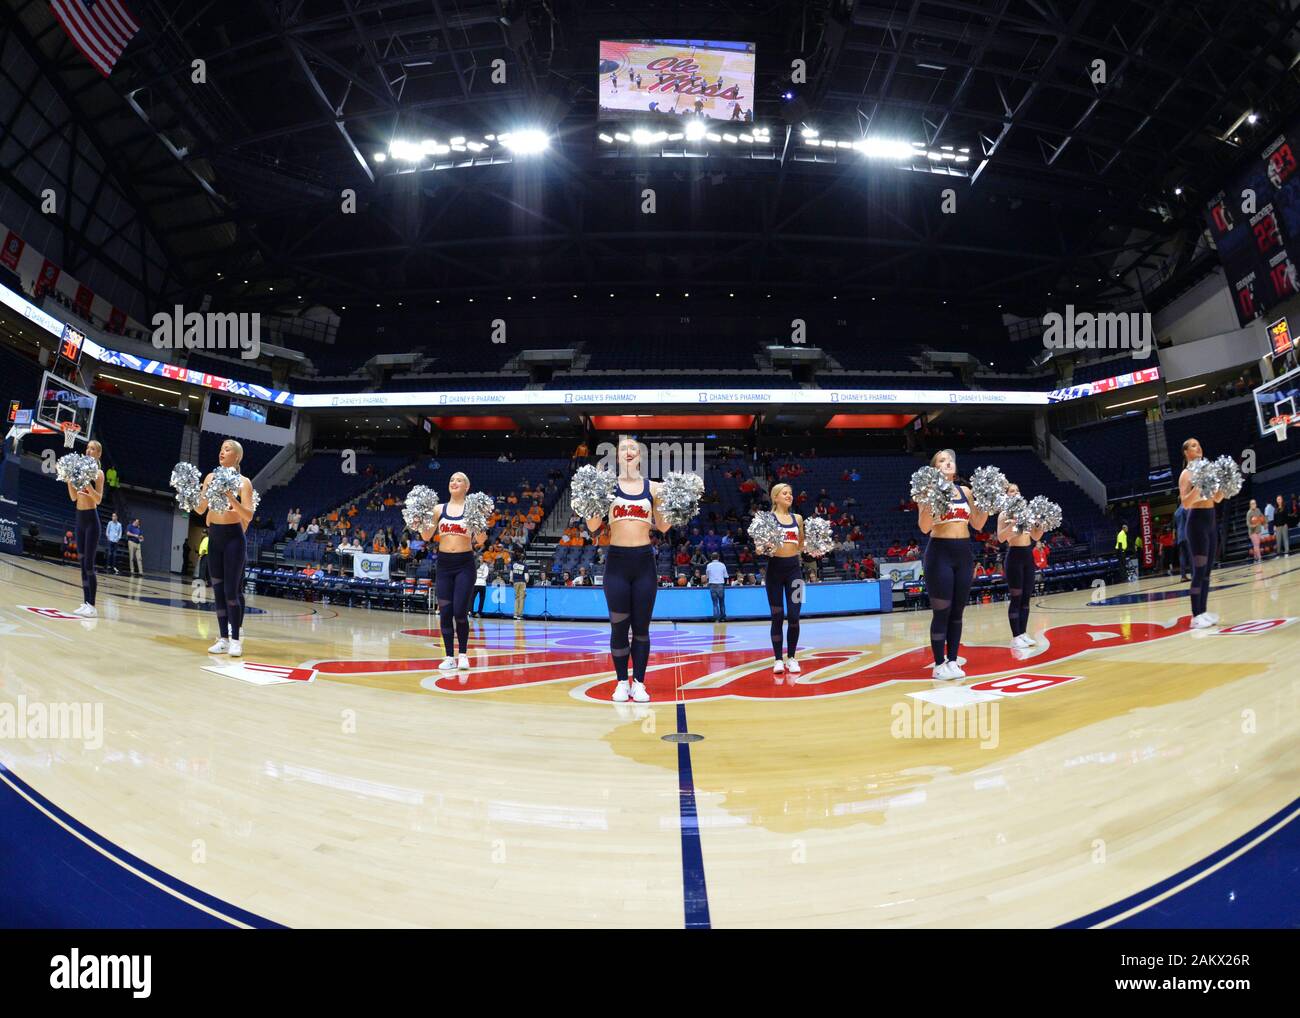 Oxford, MS, USA. 09th Jan, 2020. Ole' Miss cheerleaders perform during the NCAA women's basketball game between the Tennessee Lady Volunteers and the Ole' Miss Rebels at The Pavillion in Oxford, MS. Kevin Langley/Sports South Media/CSM/Alamy Live News Stock Photo